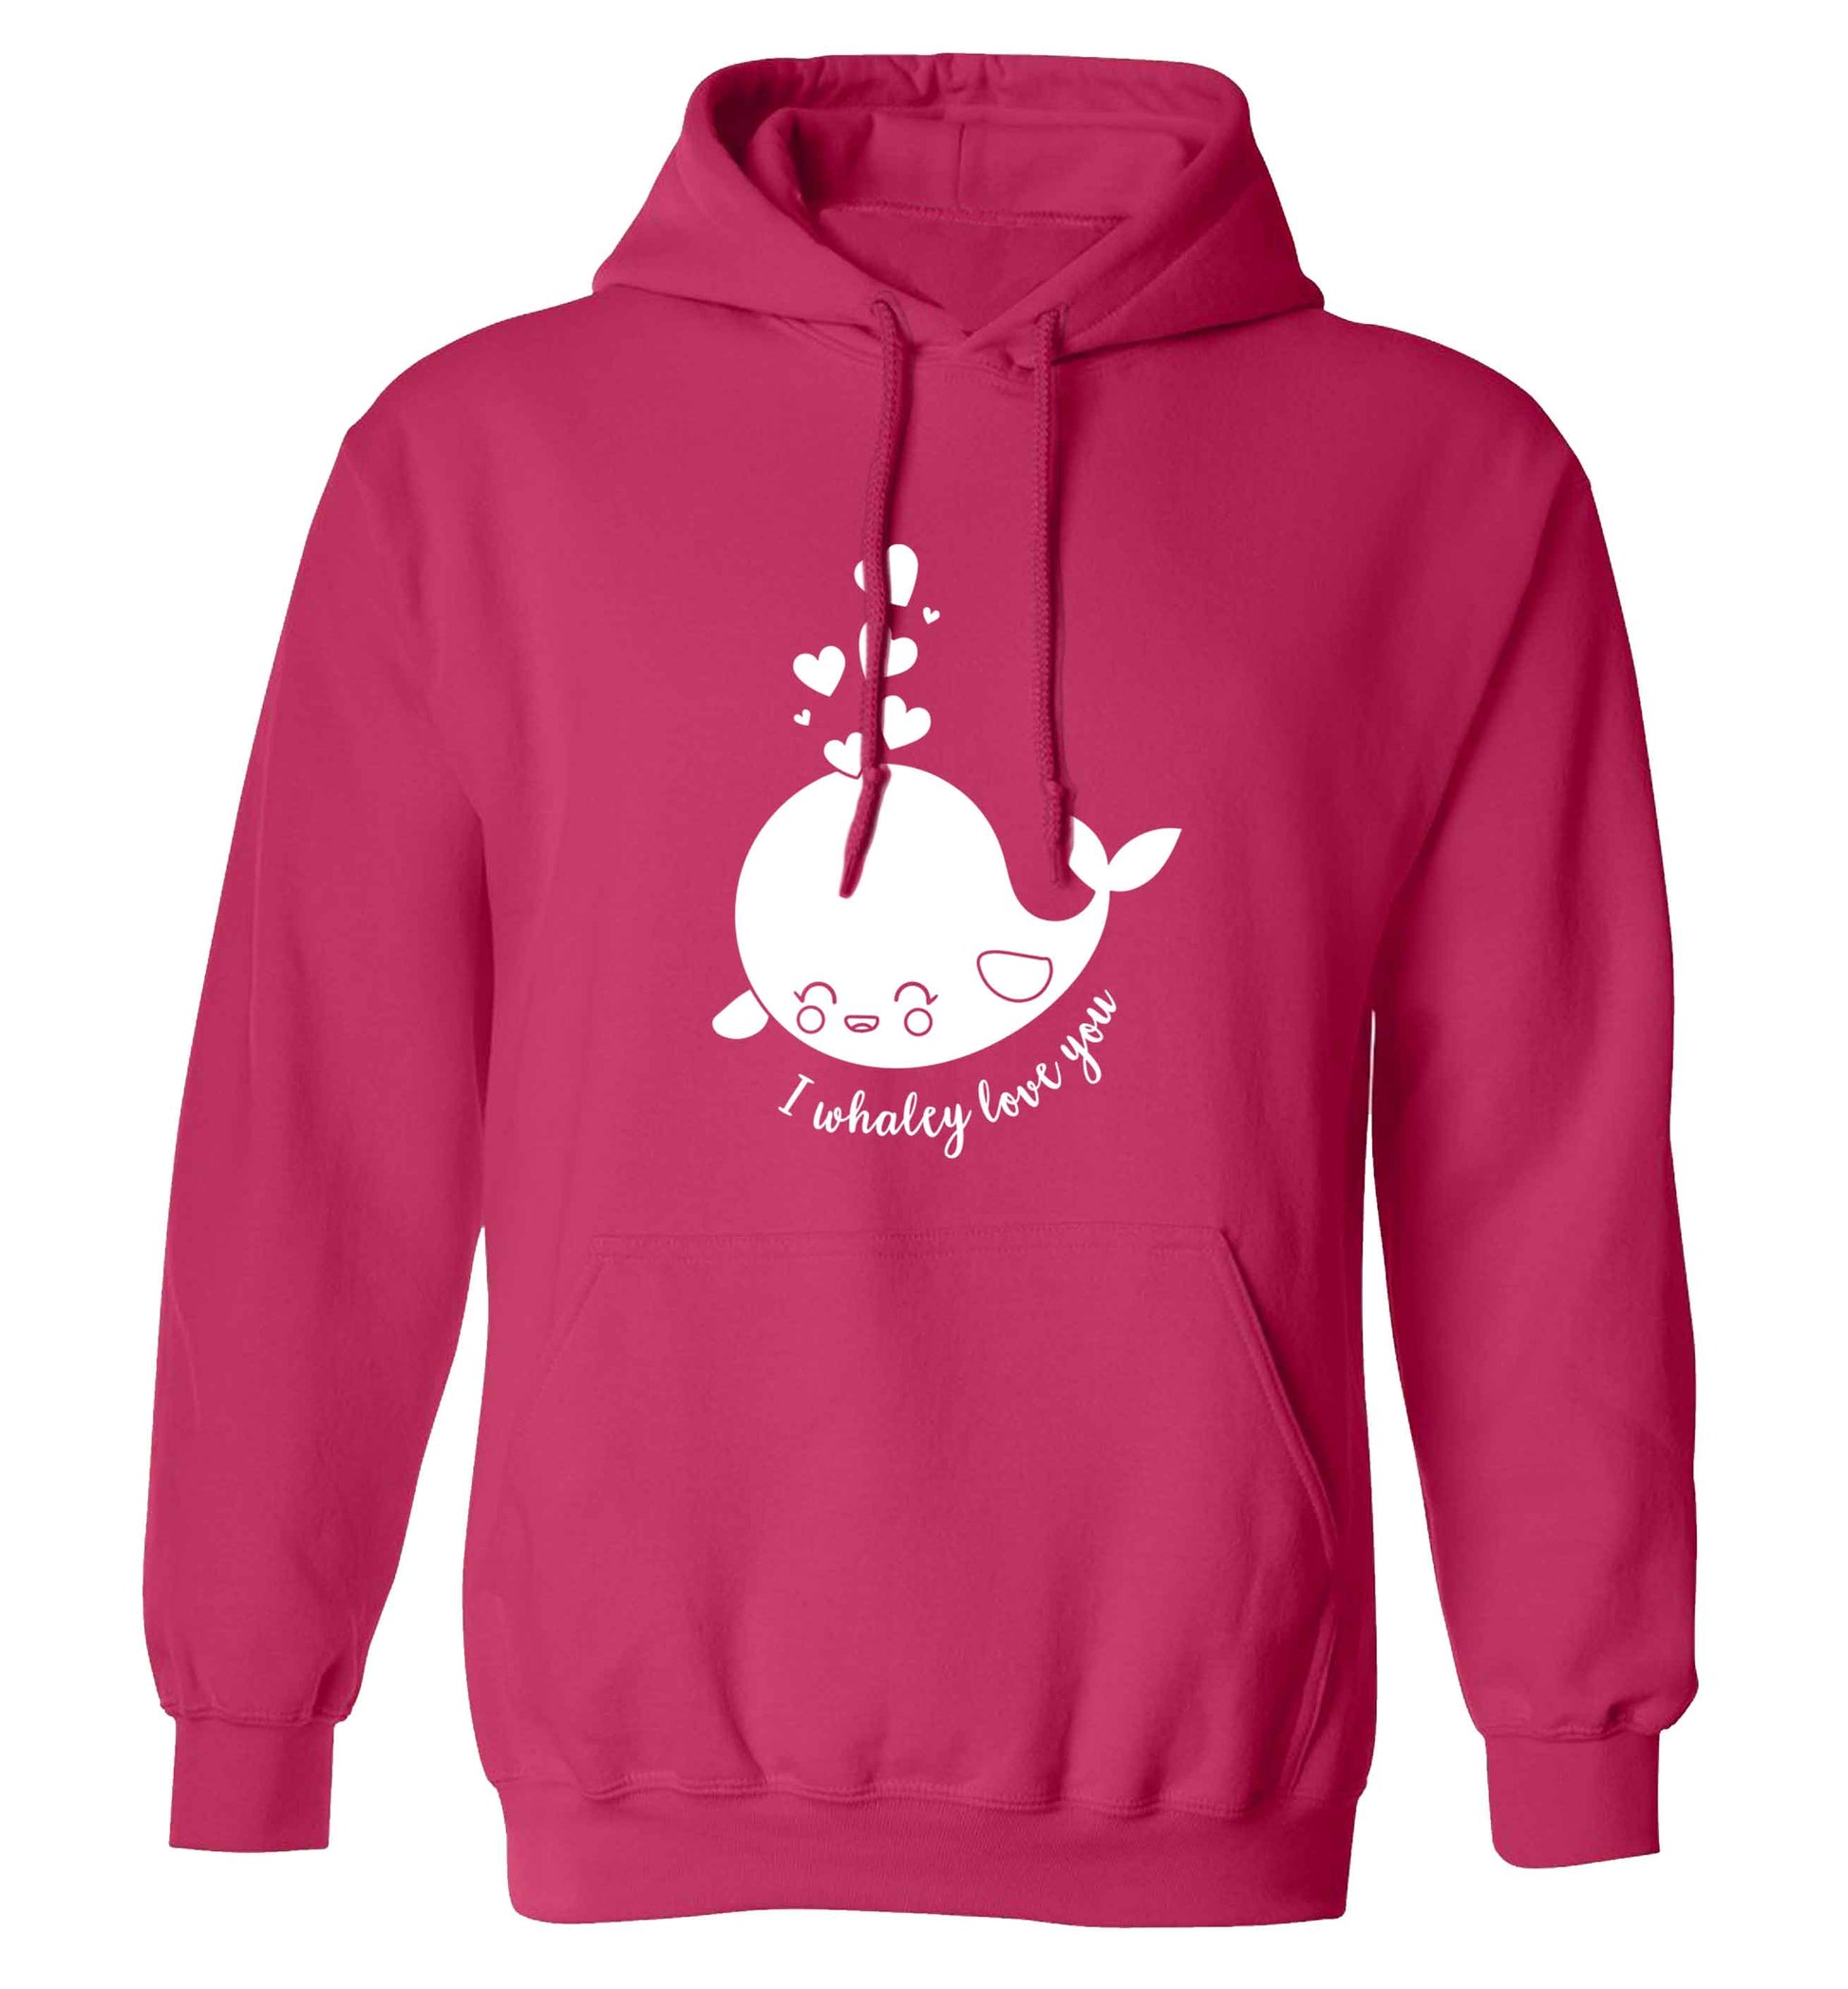 I whaley love you adults unisex pink hoodie 2XL